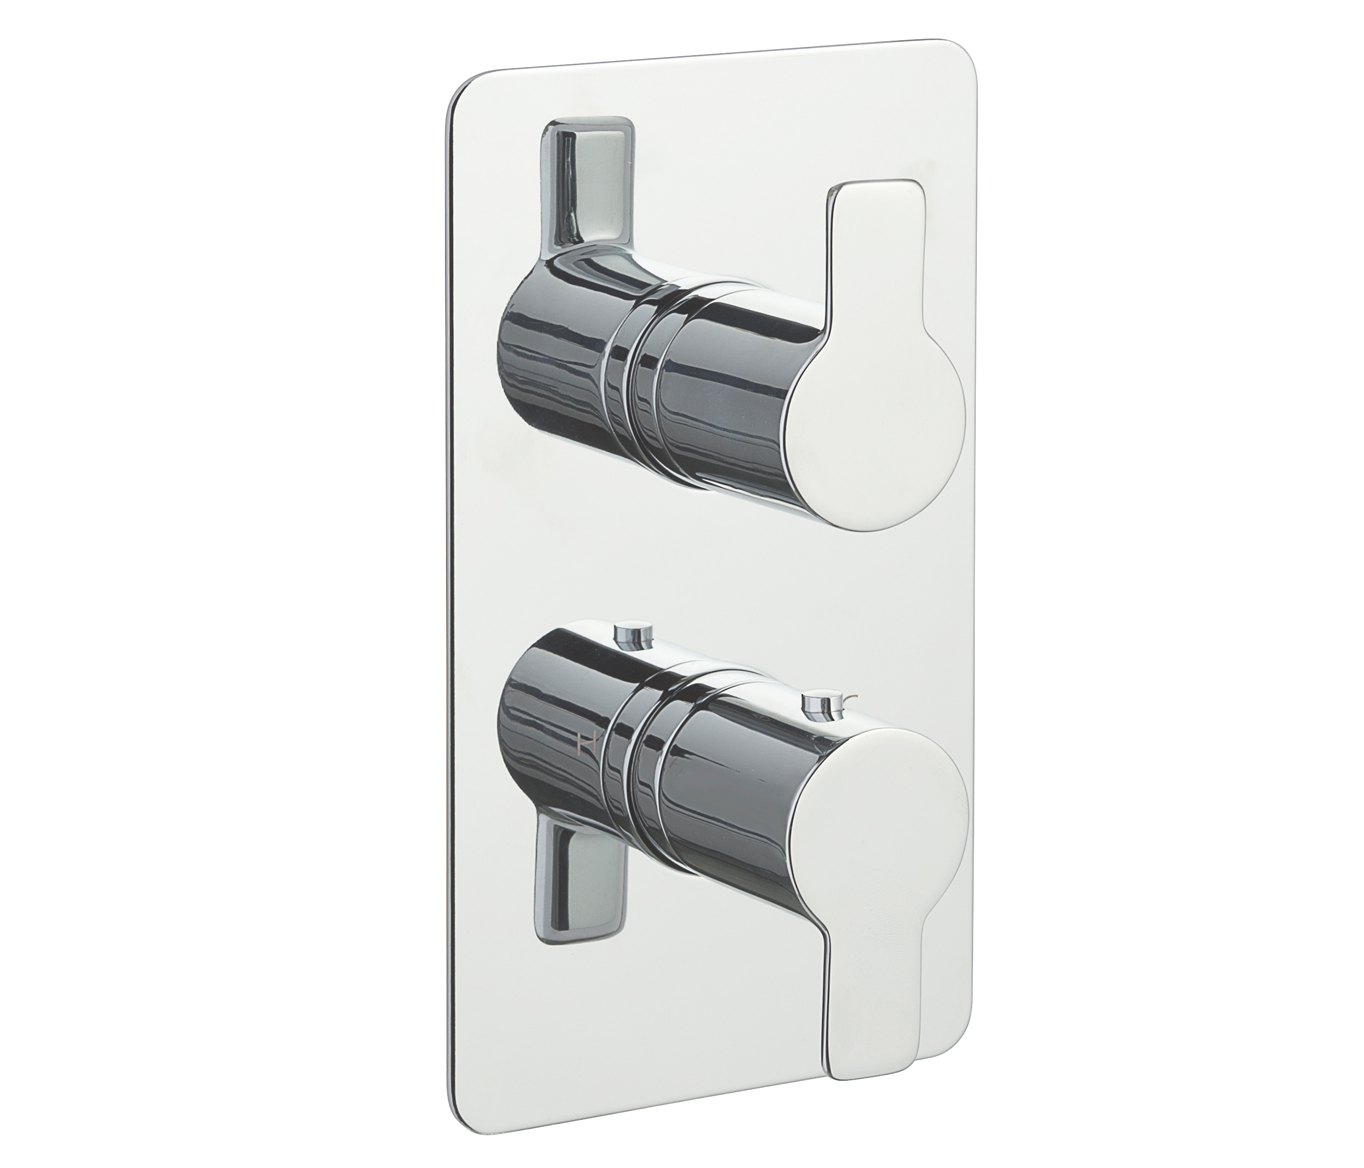 Amore 2 Outlets Thermostat